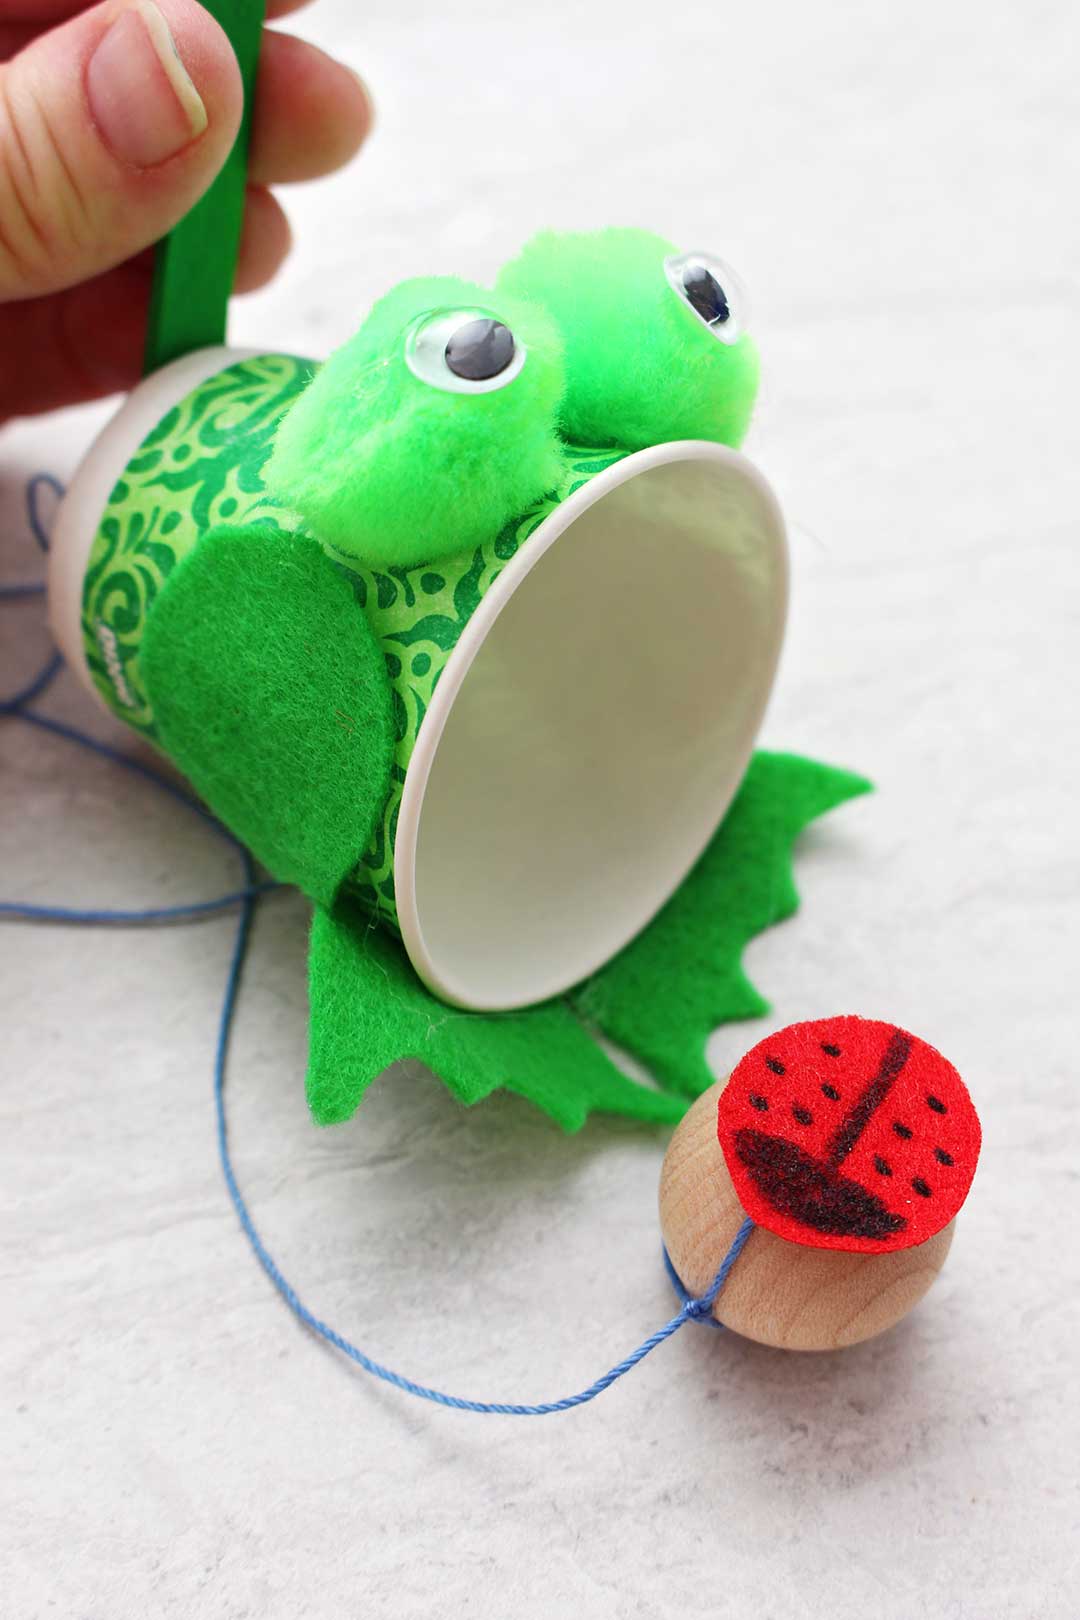 Close up view of completed green frog Ball in Cup Game with ladybug ball.